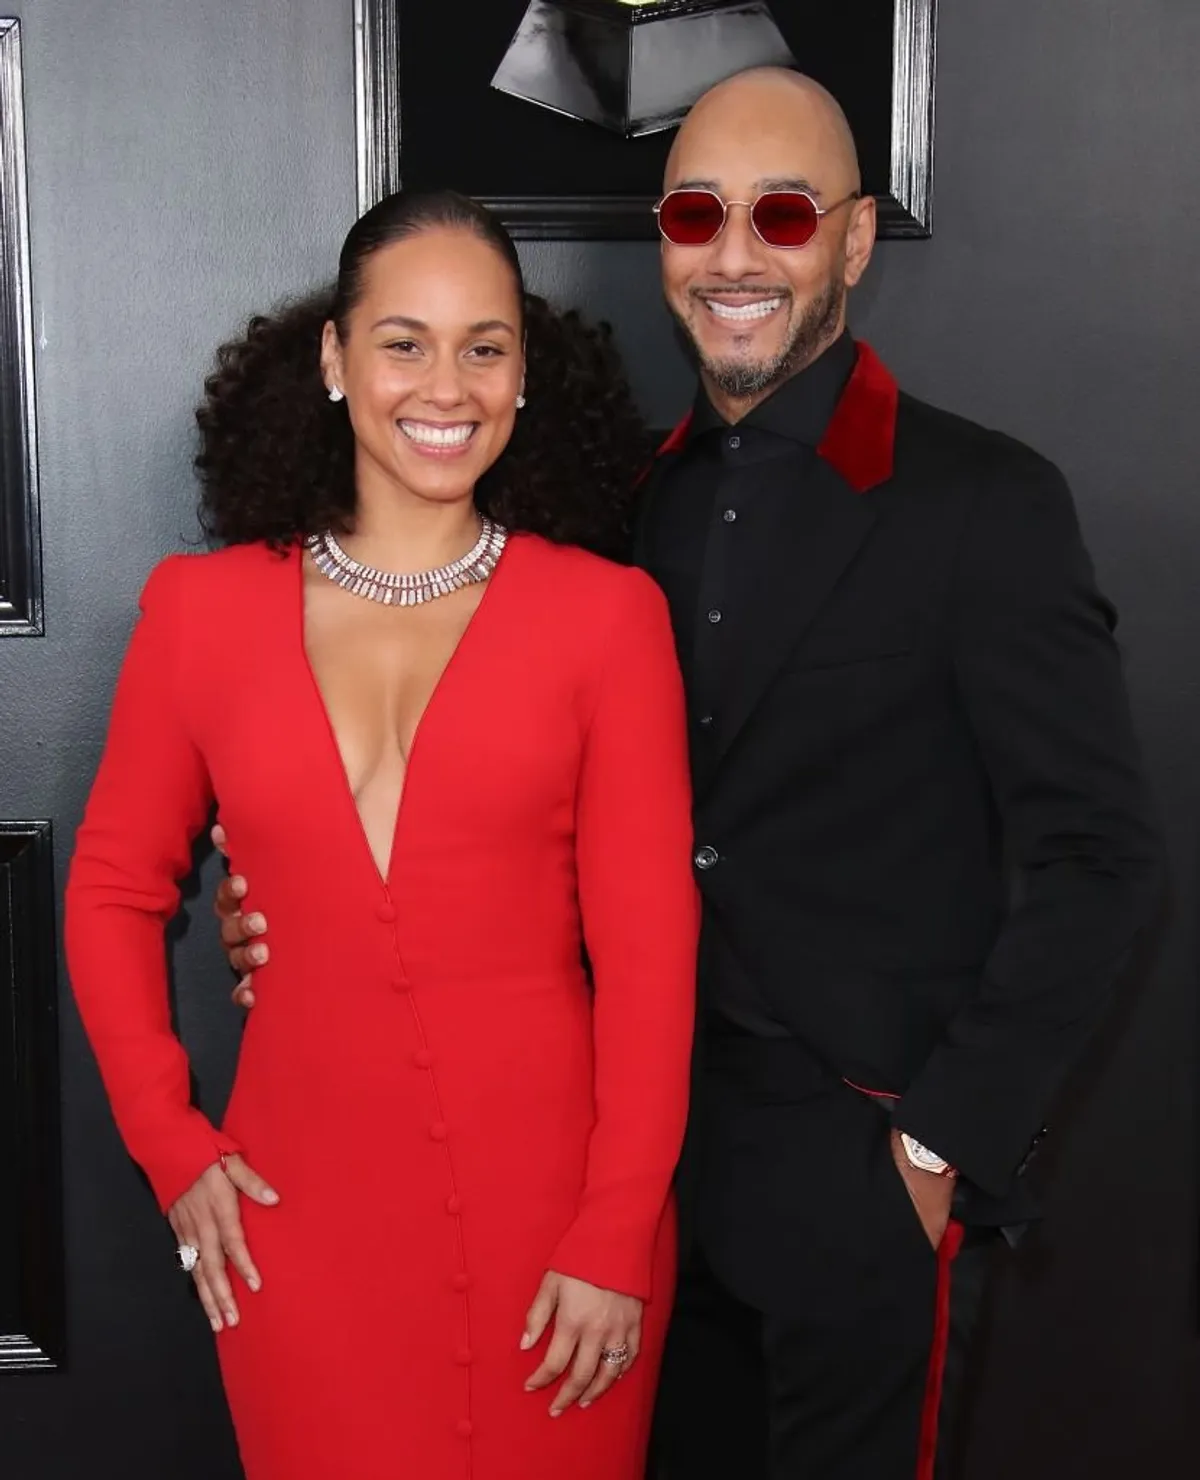 Alicia Keys and husband Swizz Beatz attend the 61st Annual Grammy Awards at the Staples Center in Los Angeles, California on February 11, 2019. | Photo: Getty Images